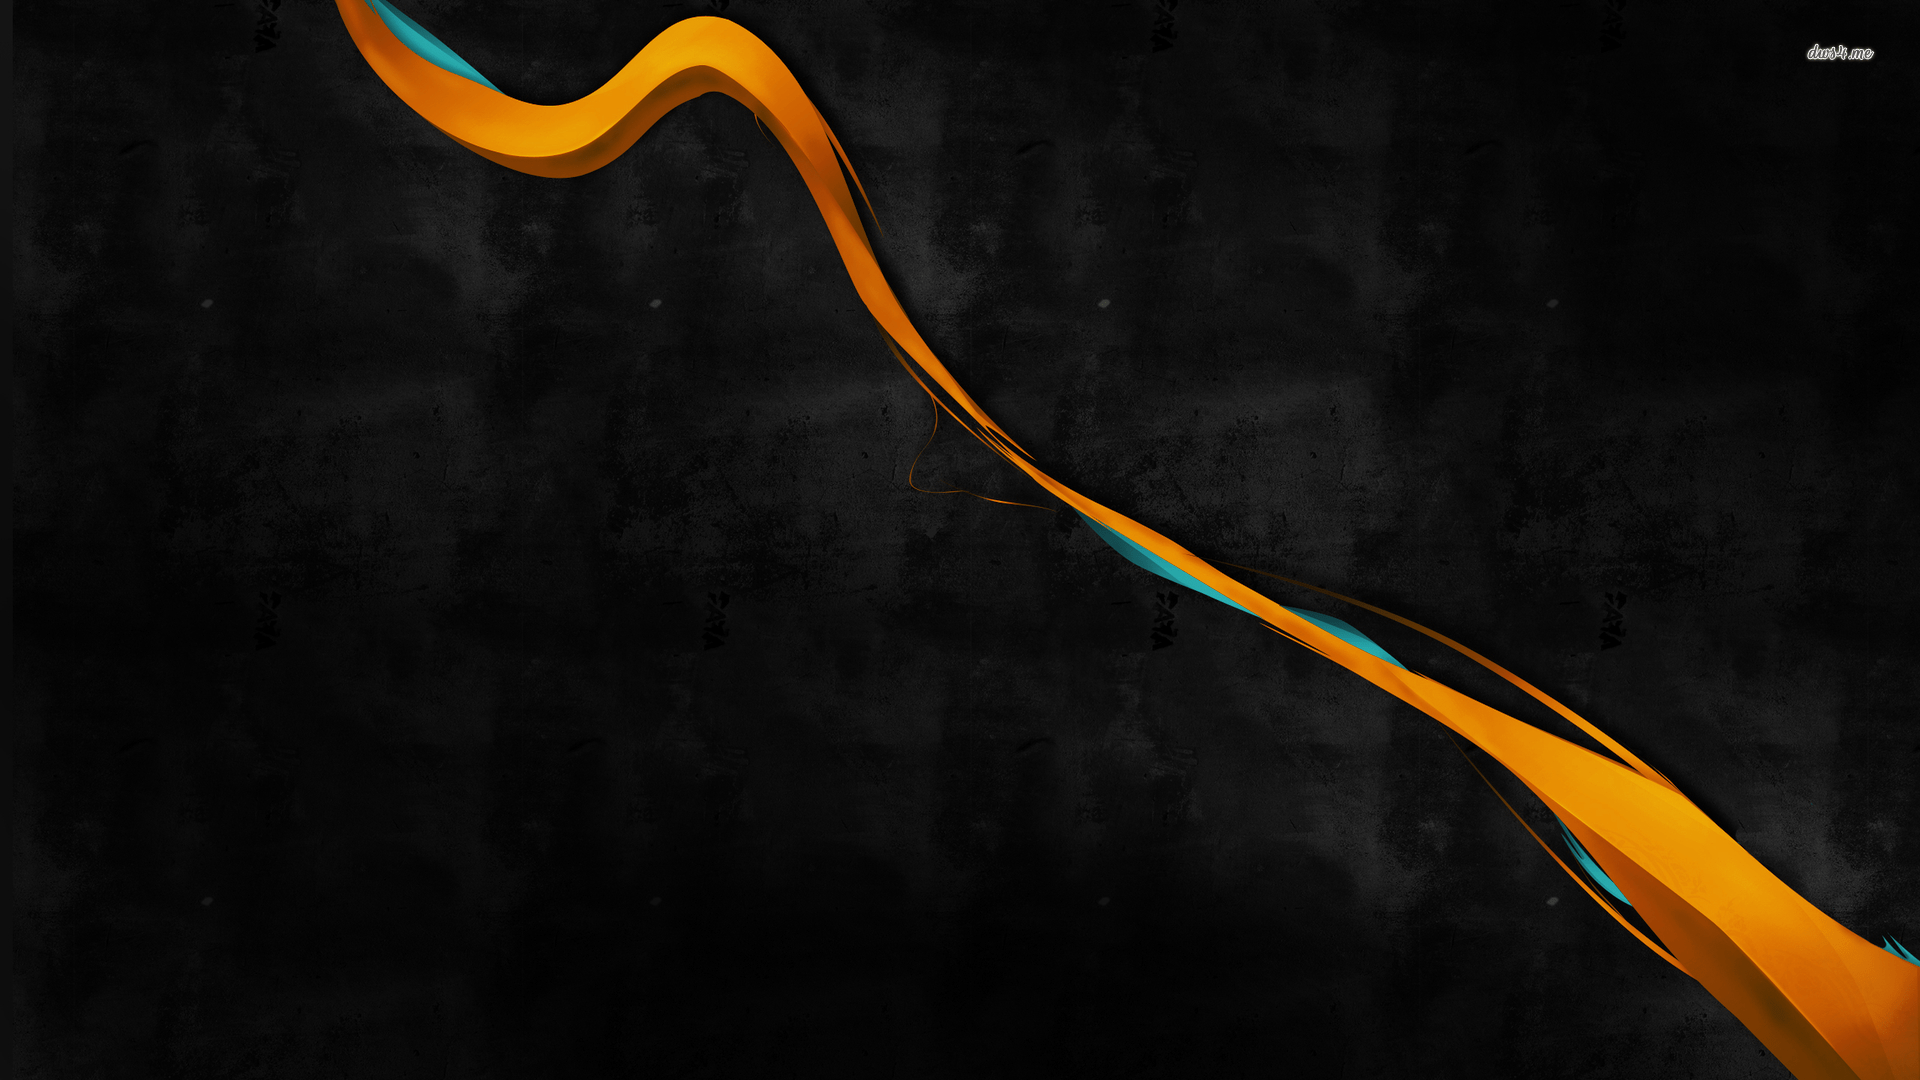 Black and Orange Abstract Wallpapers - Top Free Black and Orange